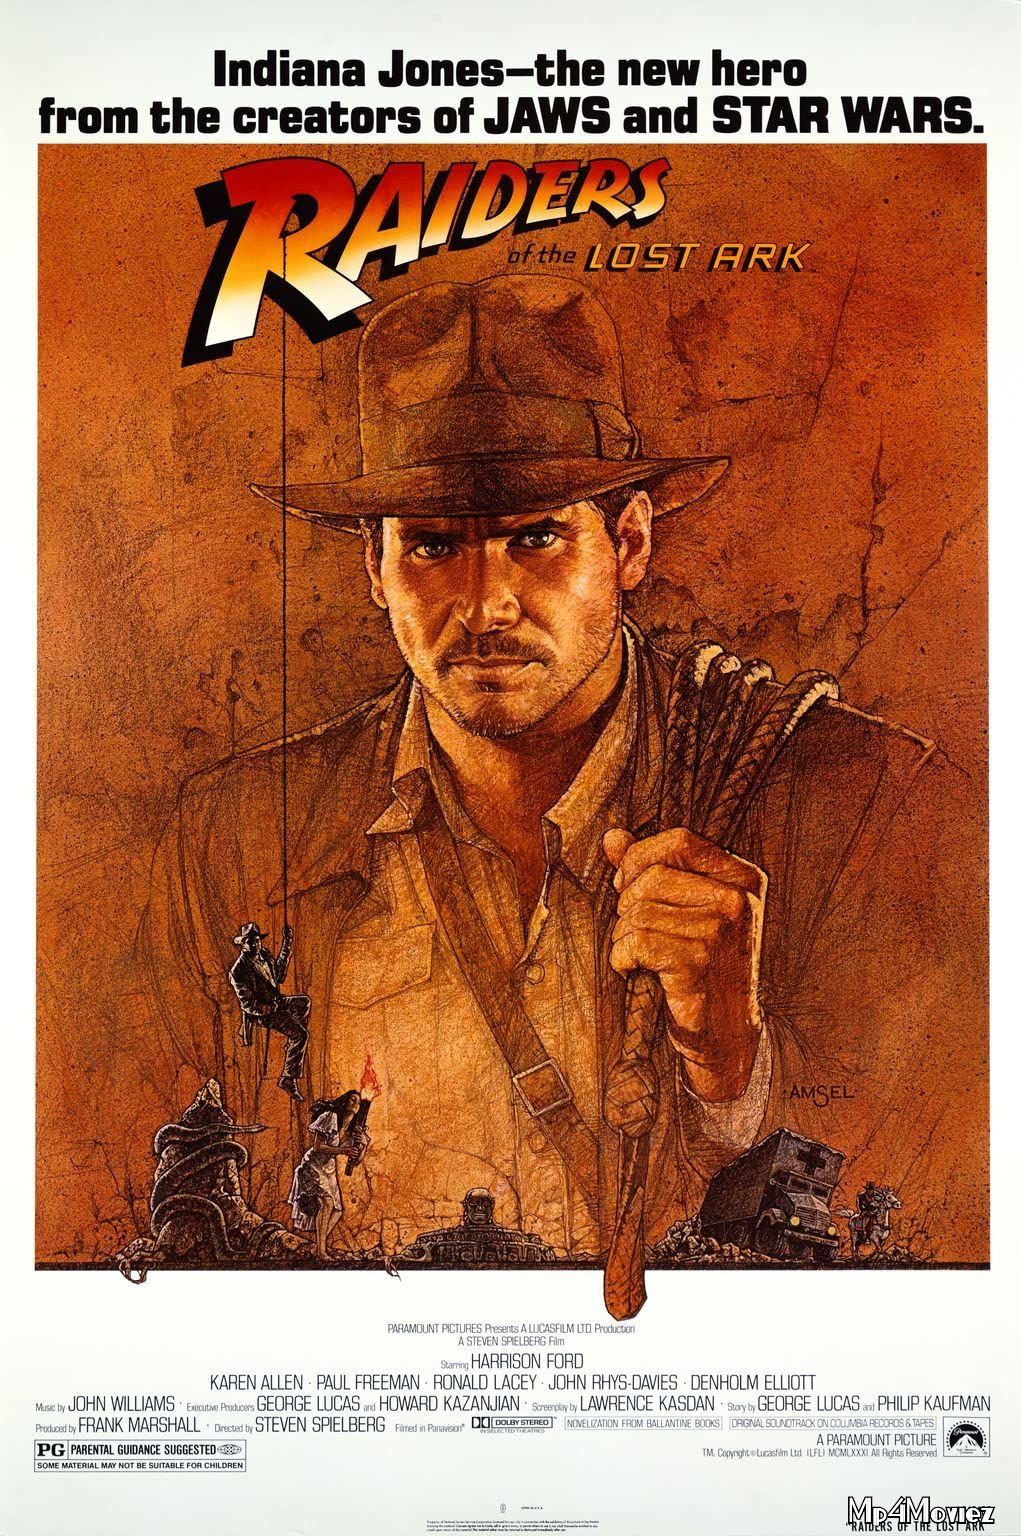 Indiana Jones and the Raiders of the Lost Ark (1981) Hindi Dubbed Movie download full movie